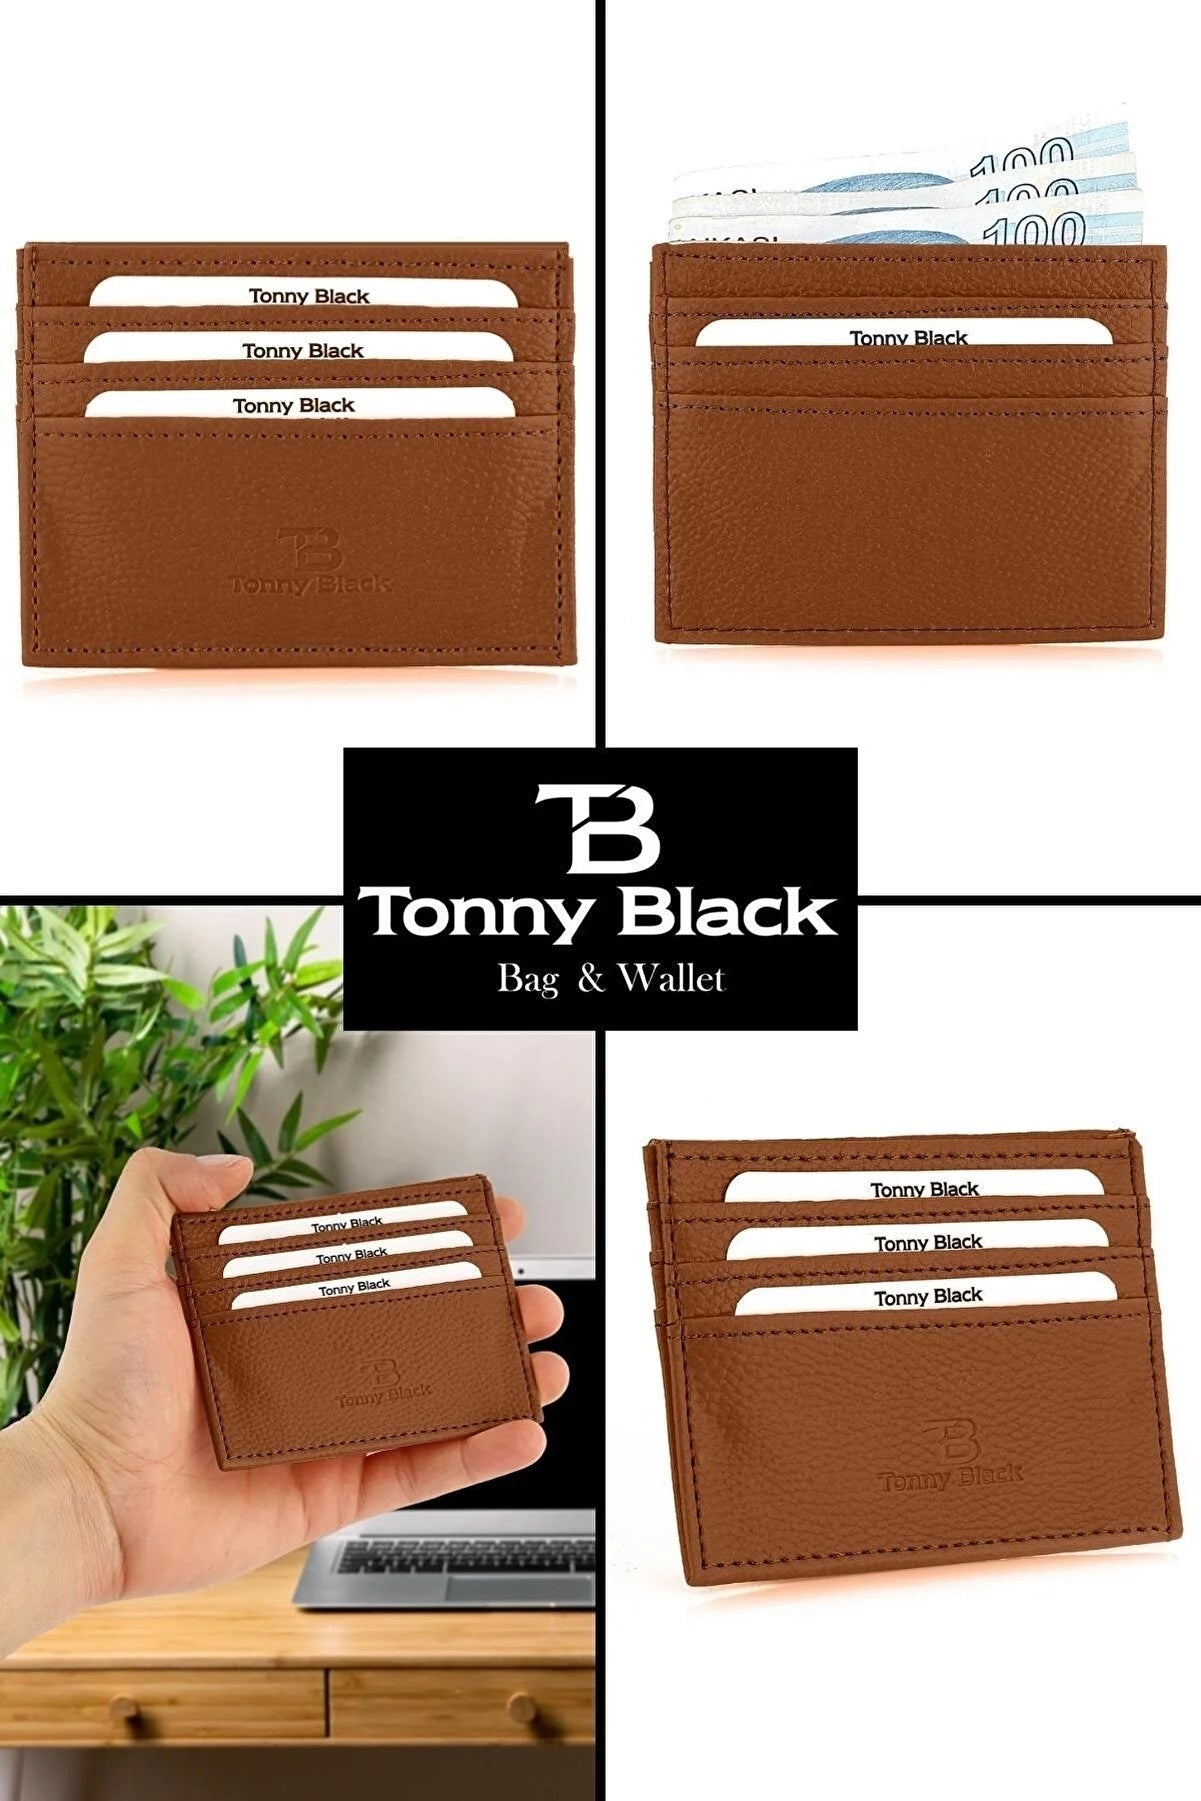 Original Boxed Unisex Super Slim Leather Thin Model Credit Card & Business Card Holder in Tan